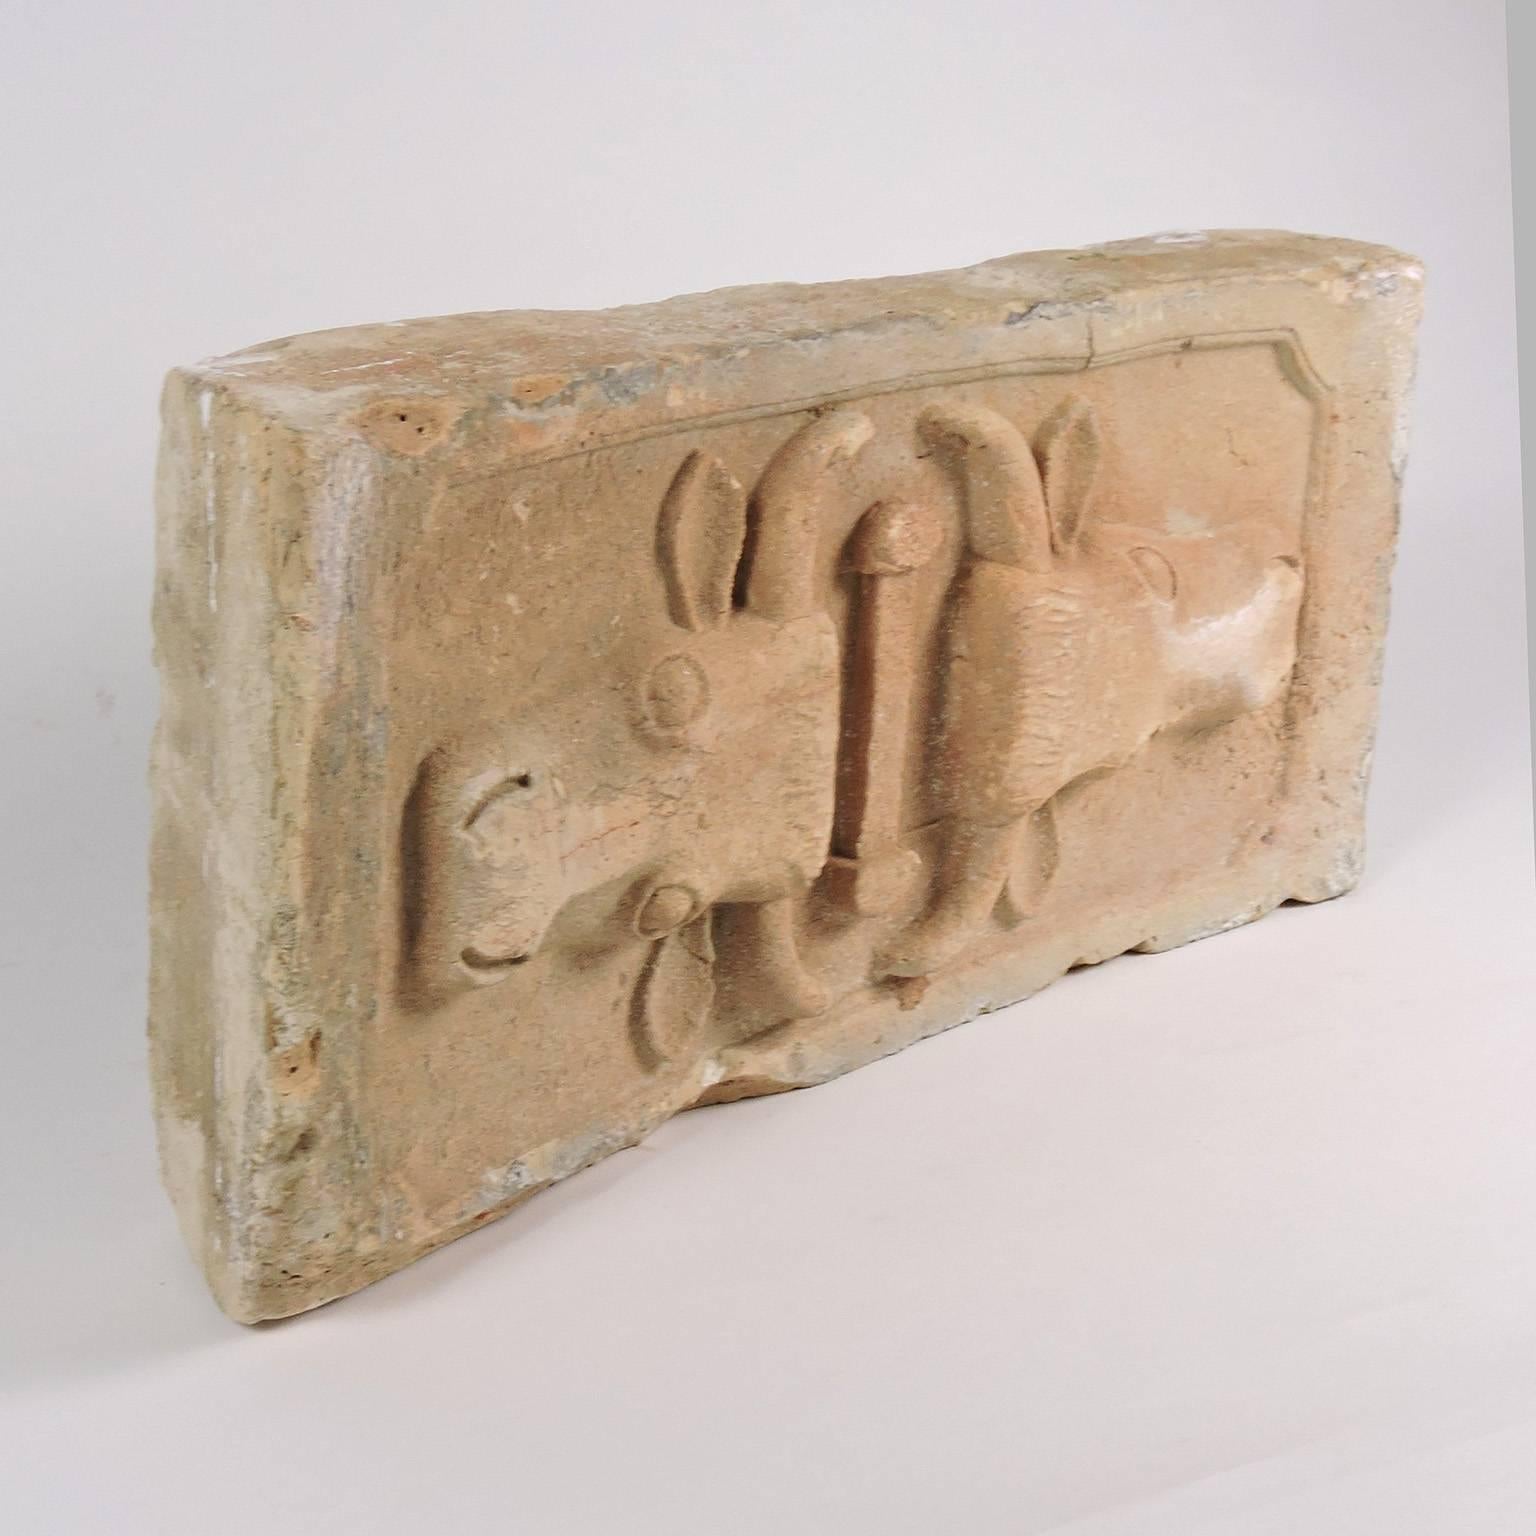 Carved sandstone architectural element with opposing bulls heads, American, 19th century, of slightly bowed form, carved in relief. Super fun and funky.
Dimensions: 8 3/4 x 18 1/2 x 4 1/4 inches. Approx. 20-25 lbs.